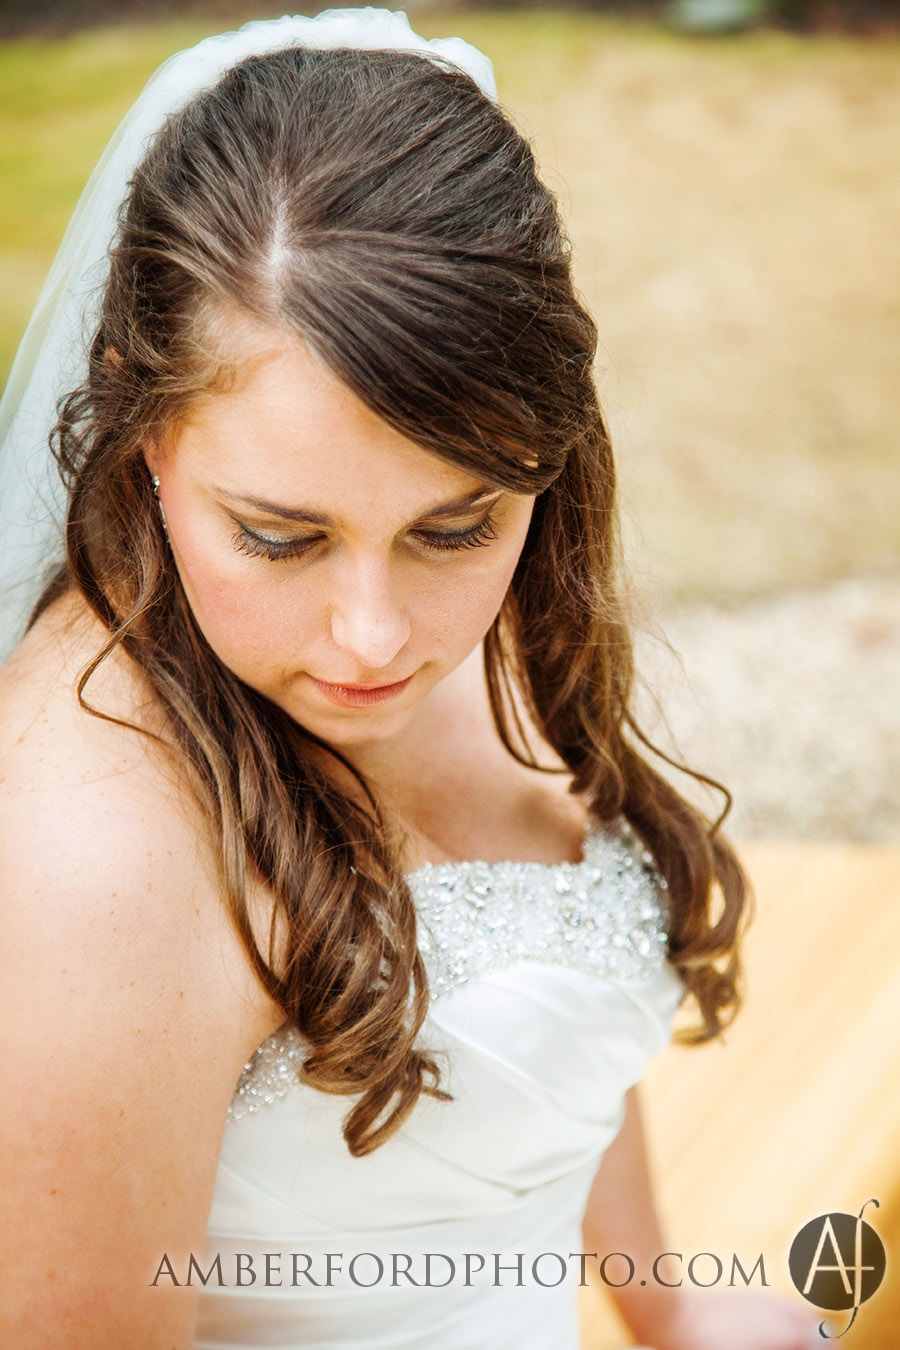 Amber Ford Photography: Nicole {Bridal}